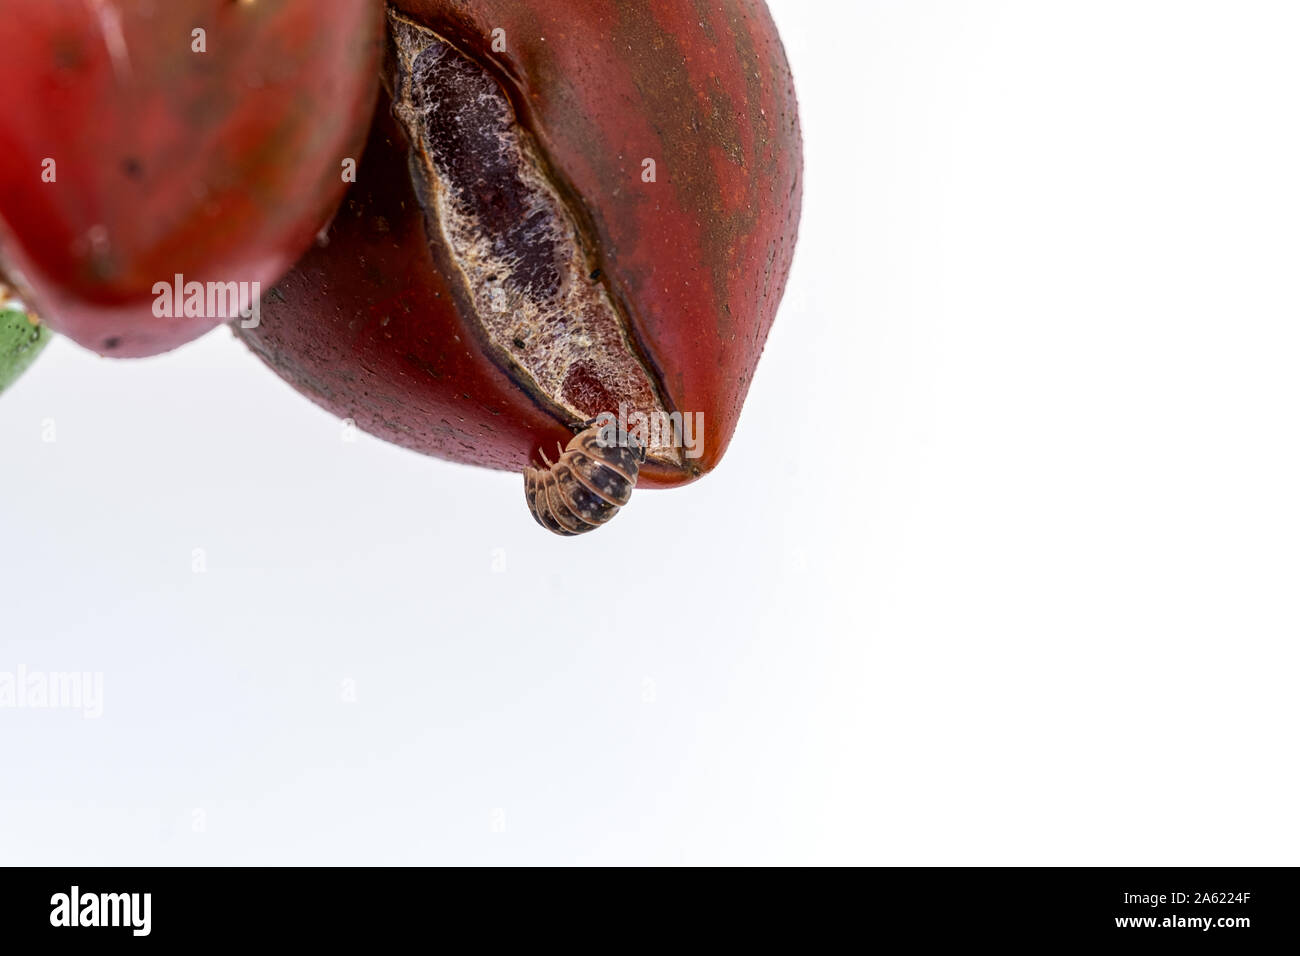 tomato, rotten, overripe, cracked, food for insects Stock Photo